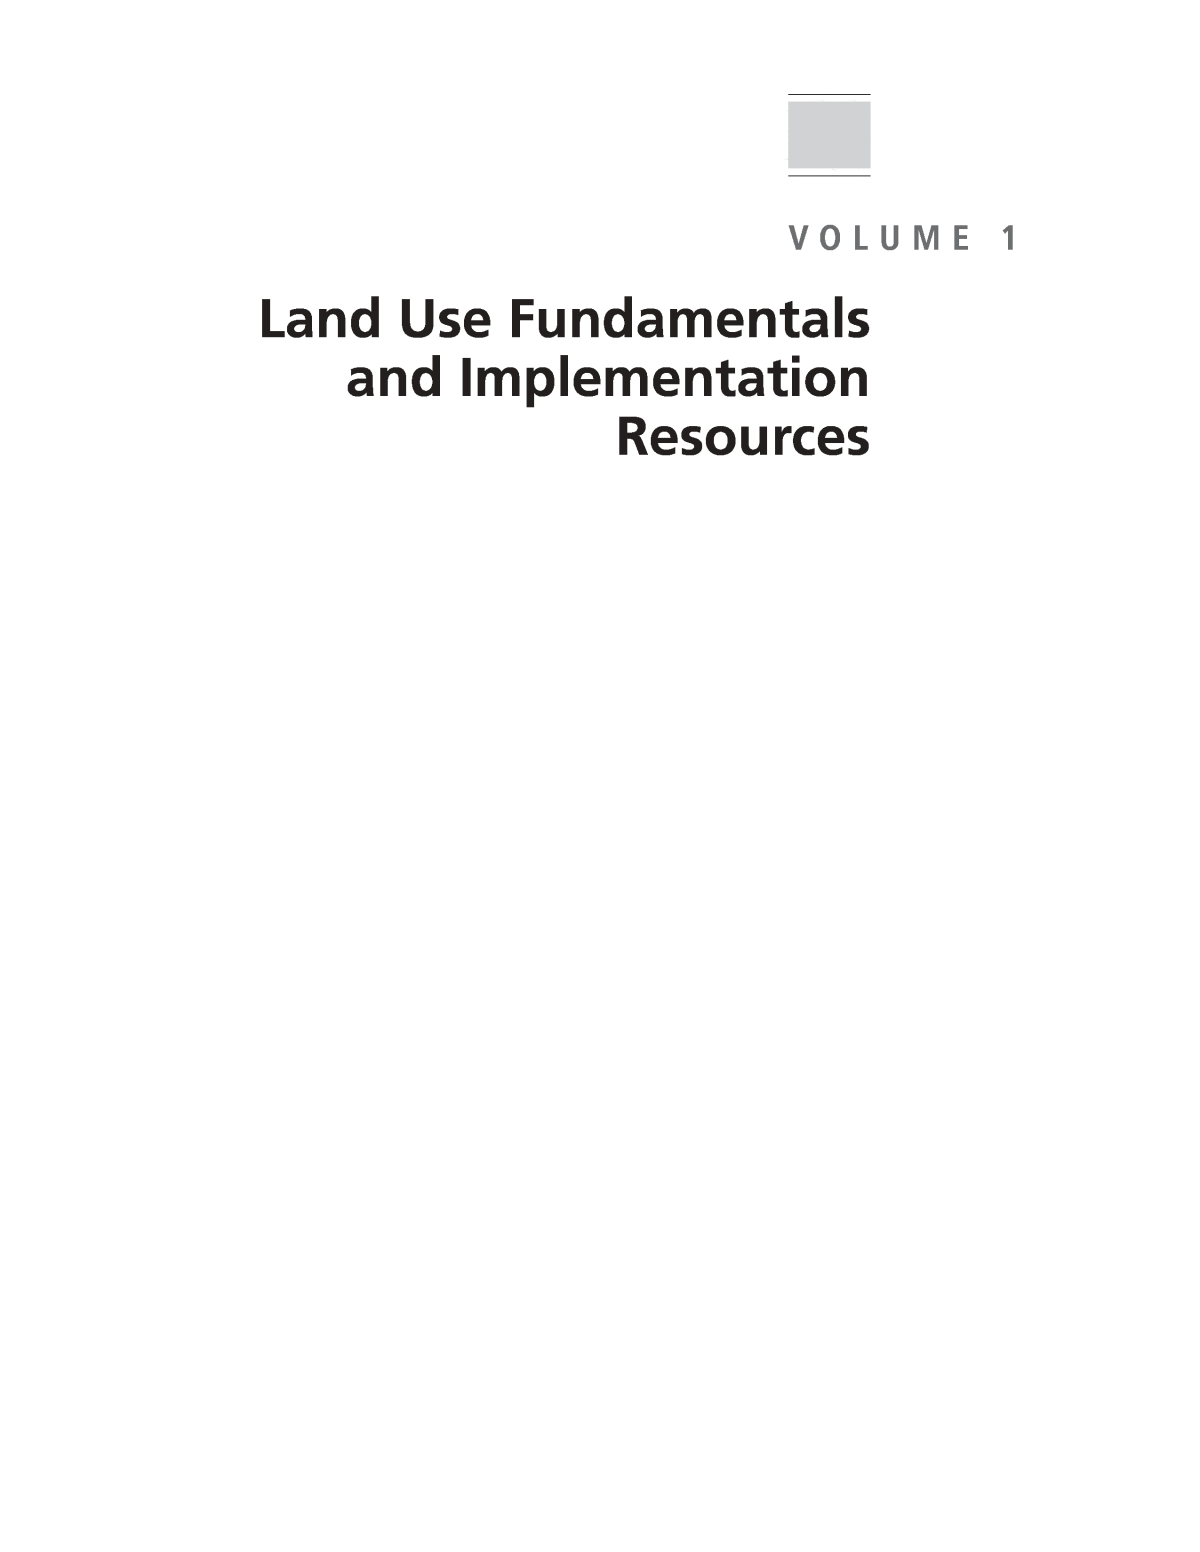 Volume 1 - Land Use Fundamentals and Implementation Resources